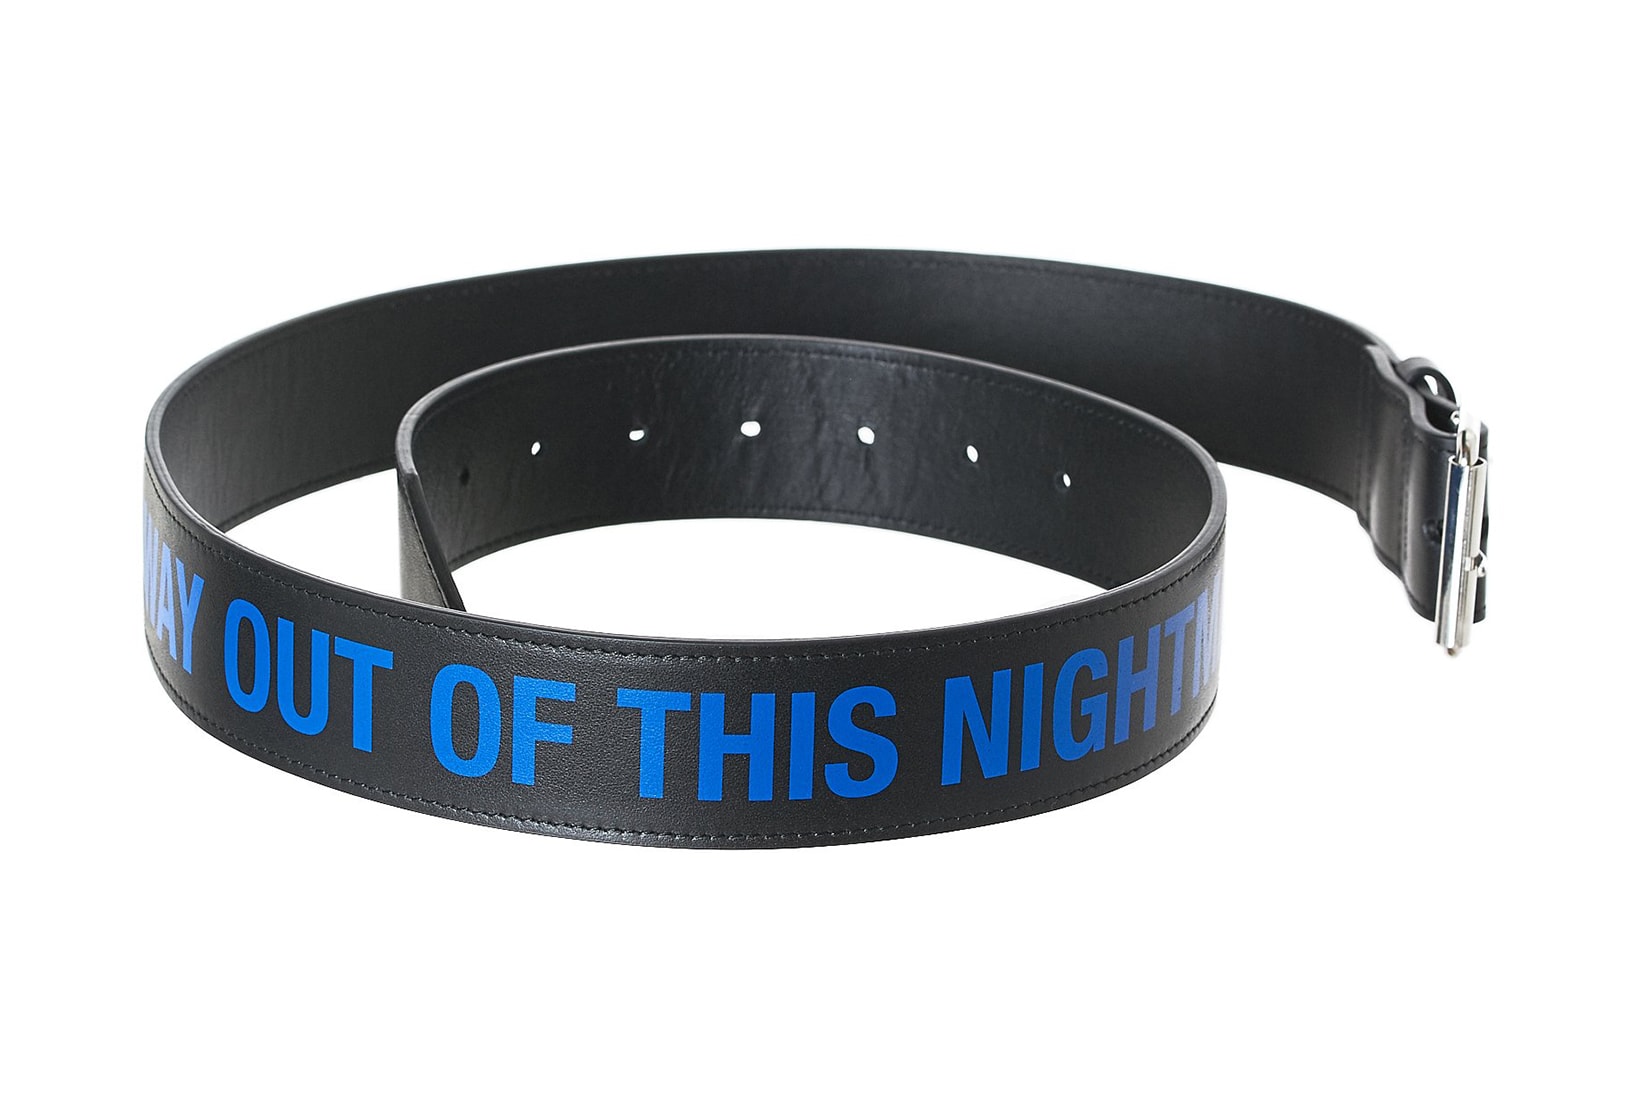 Raf Simons ANY WAY OUT OF THIS NIGHTMARE Graphic Print Leather Belt Black Blue 2017 Fall Winter October Release Date Info H Lorenzo